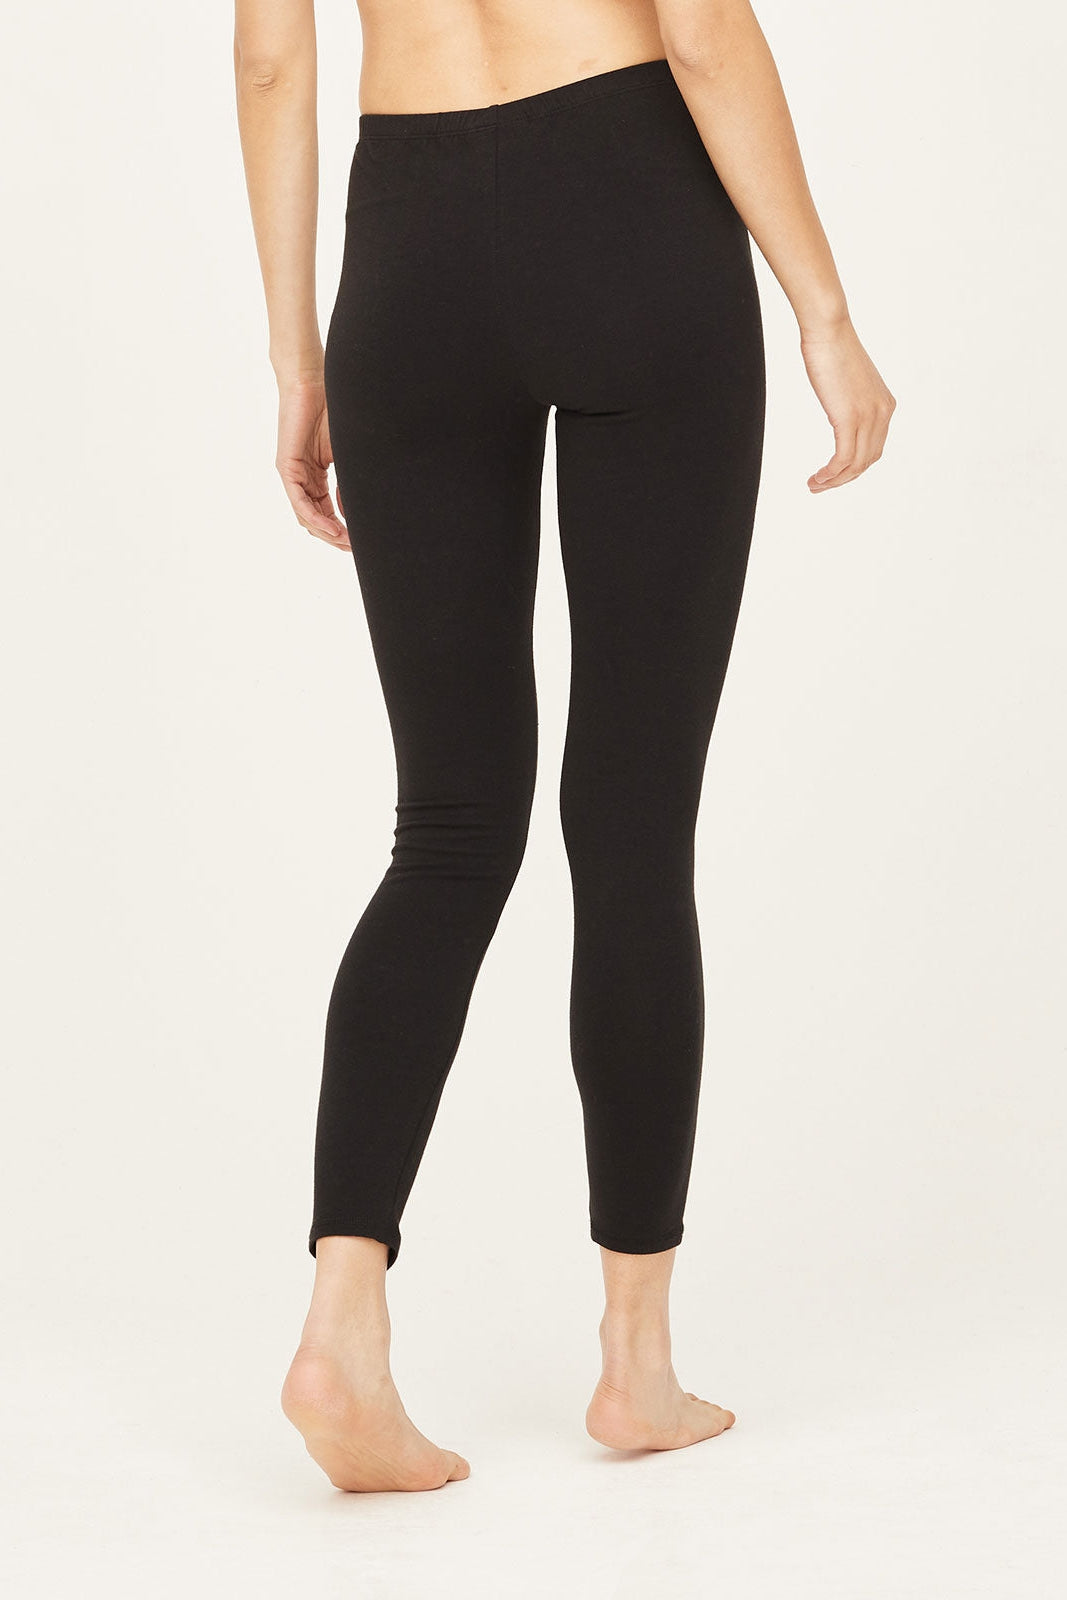 Thought GOTS Organic Cotton Leggings-Women-Ohh! By Gum - Shop Sustainable